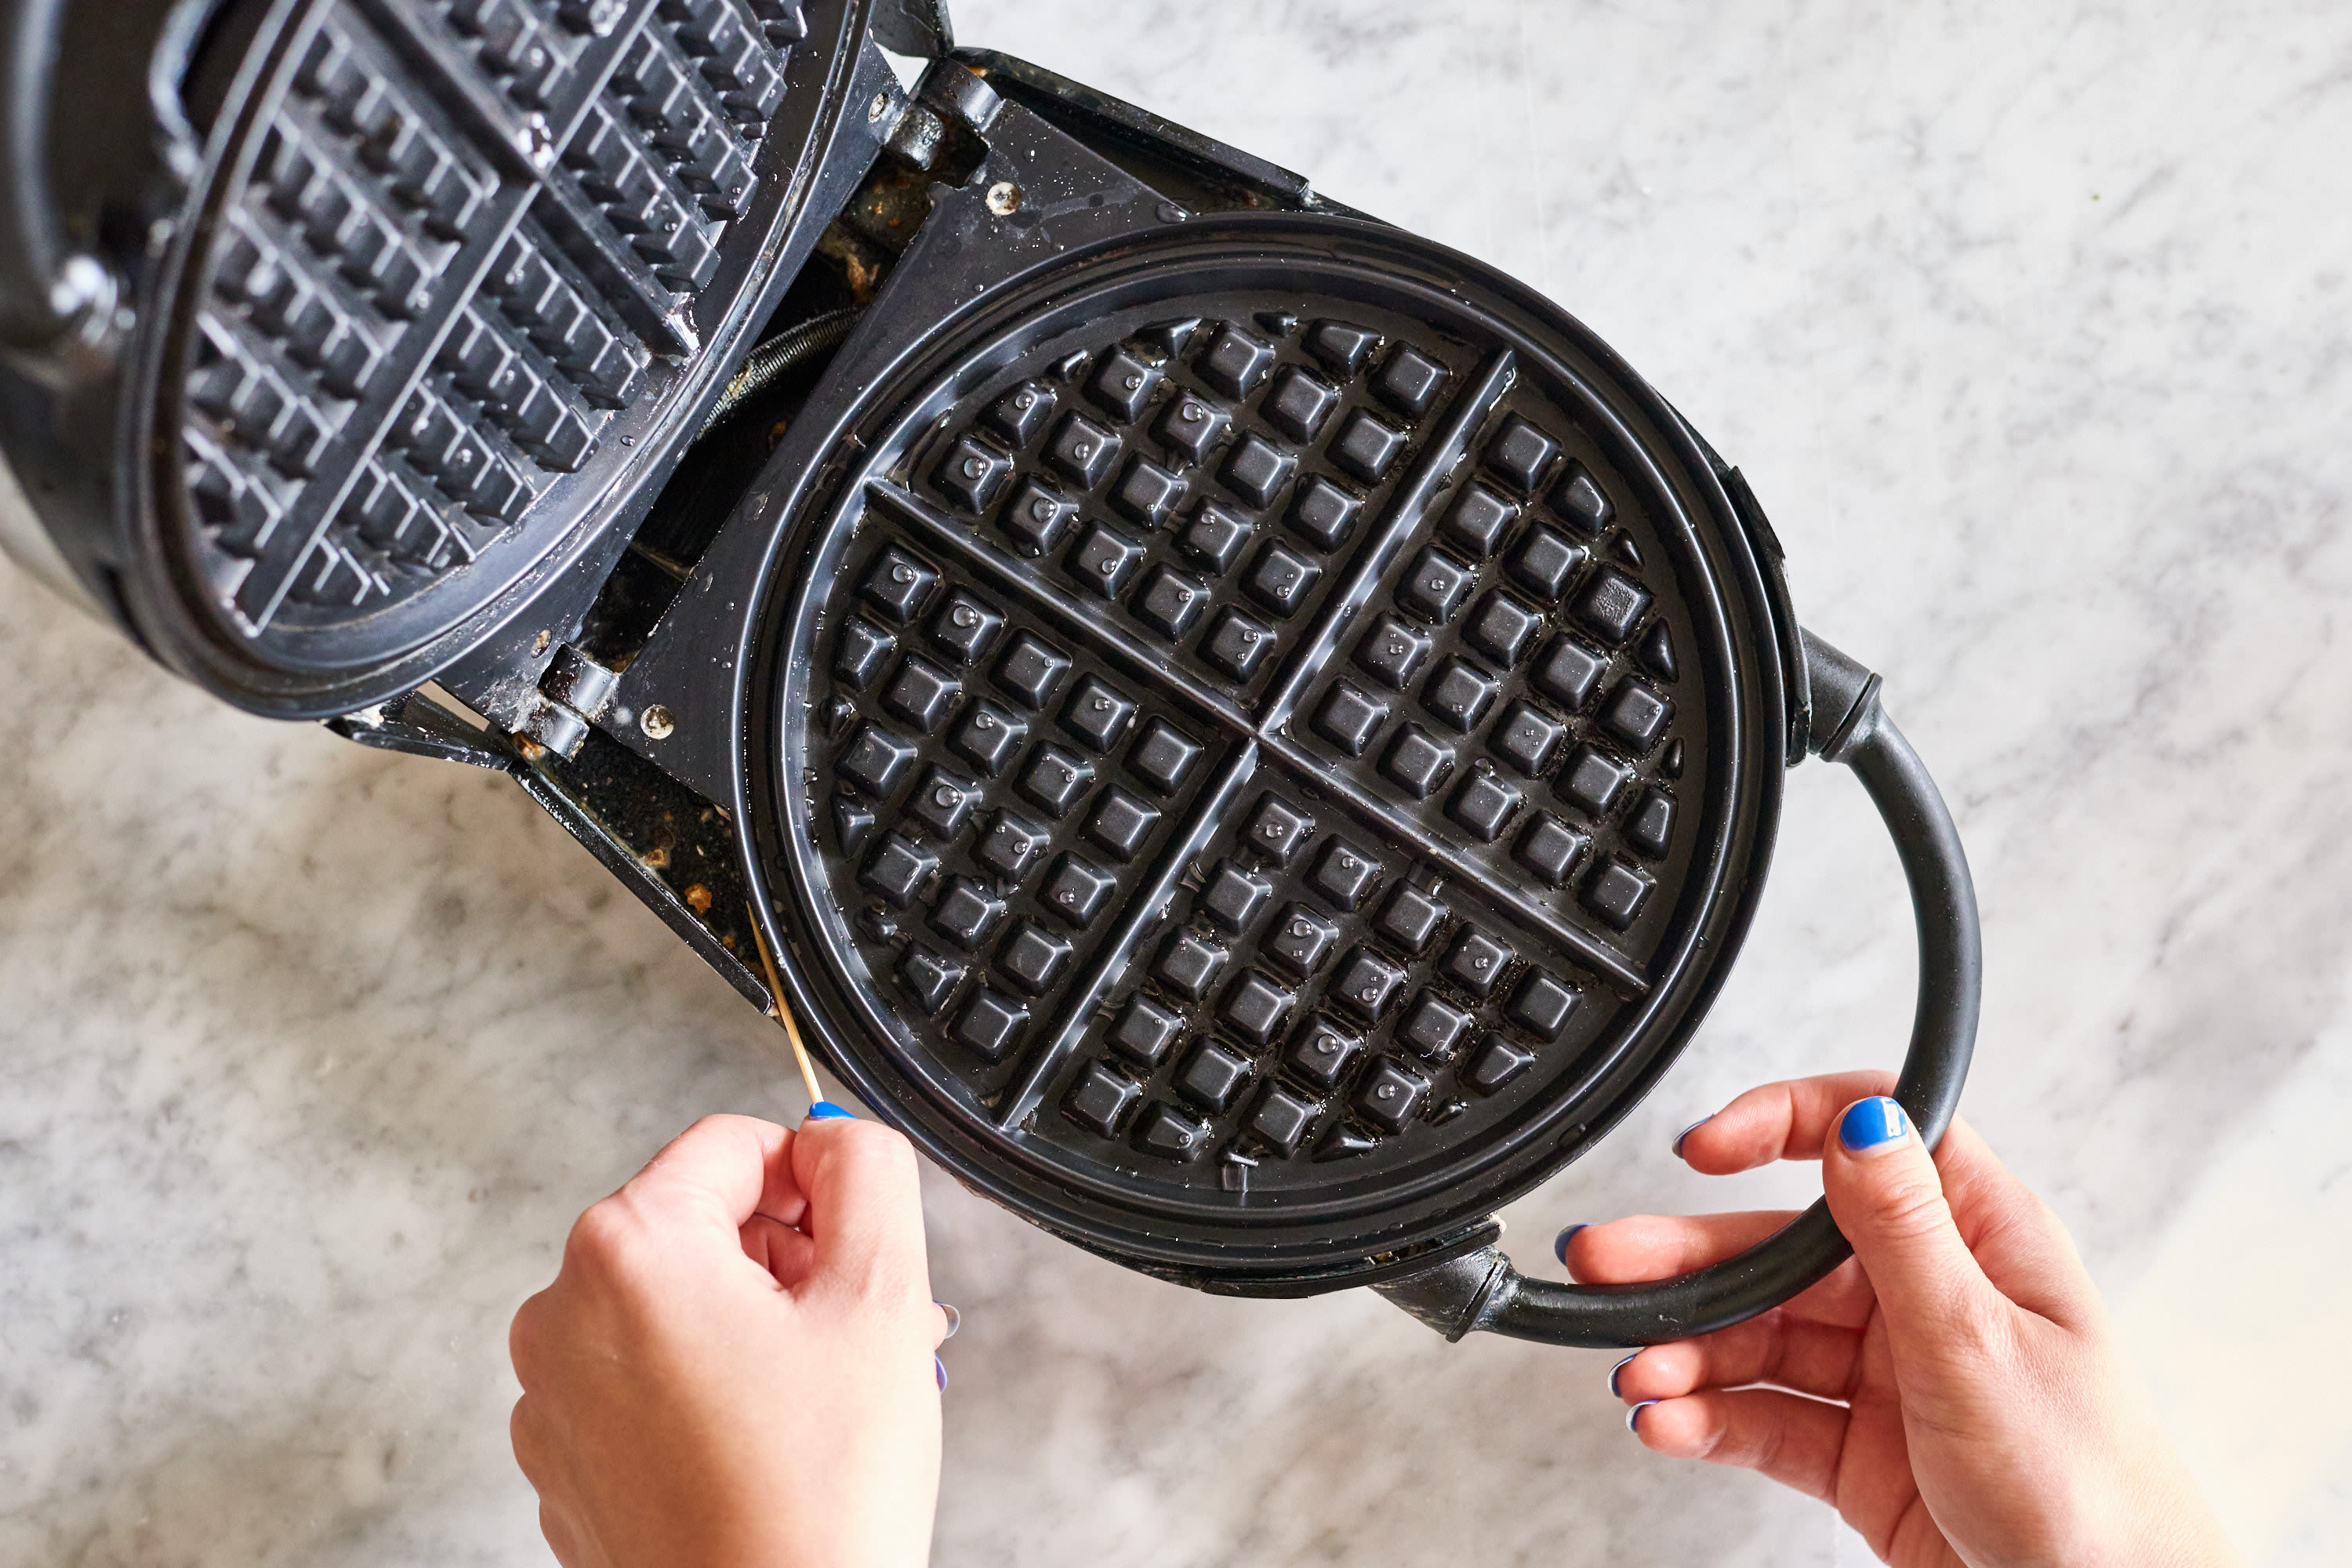 https://cdn.apartmenttherapy.info/image/upload/v1566580099/k/Photo/Lifestyle/2019-09-how-to-clean-a-waffle-iron/How-to-Clean-an-Impossibly-Gross-Waffle-Iron_064.jpg